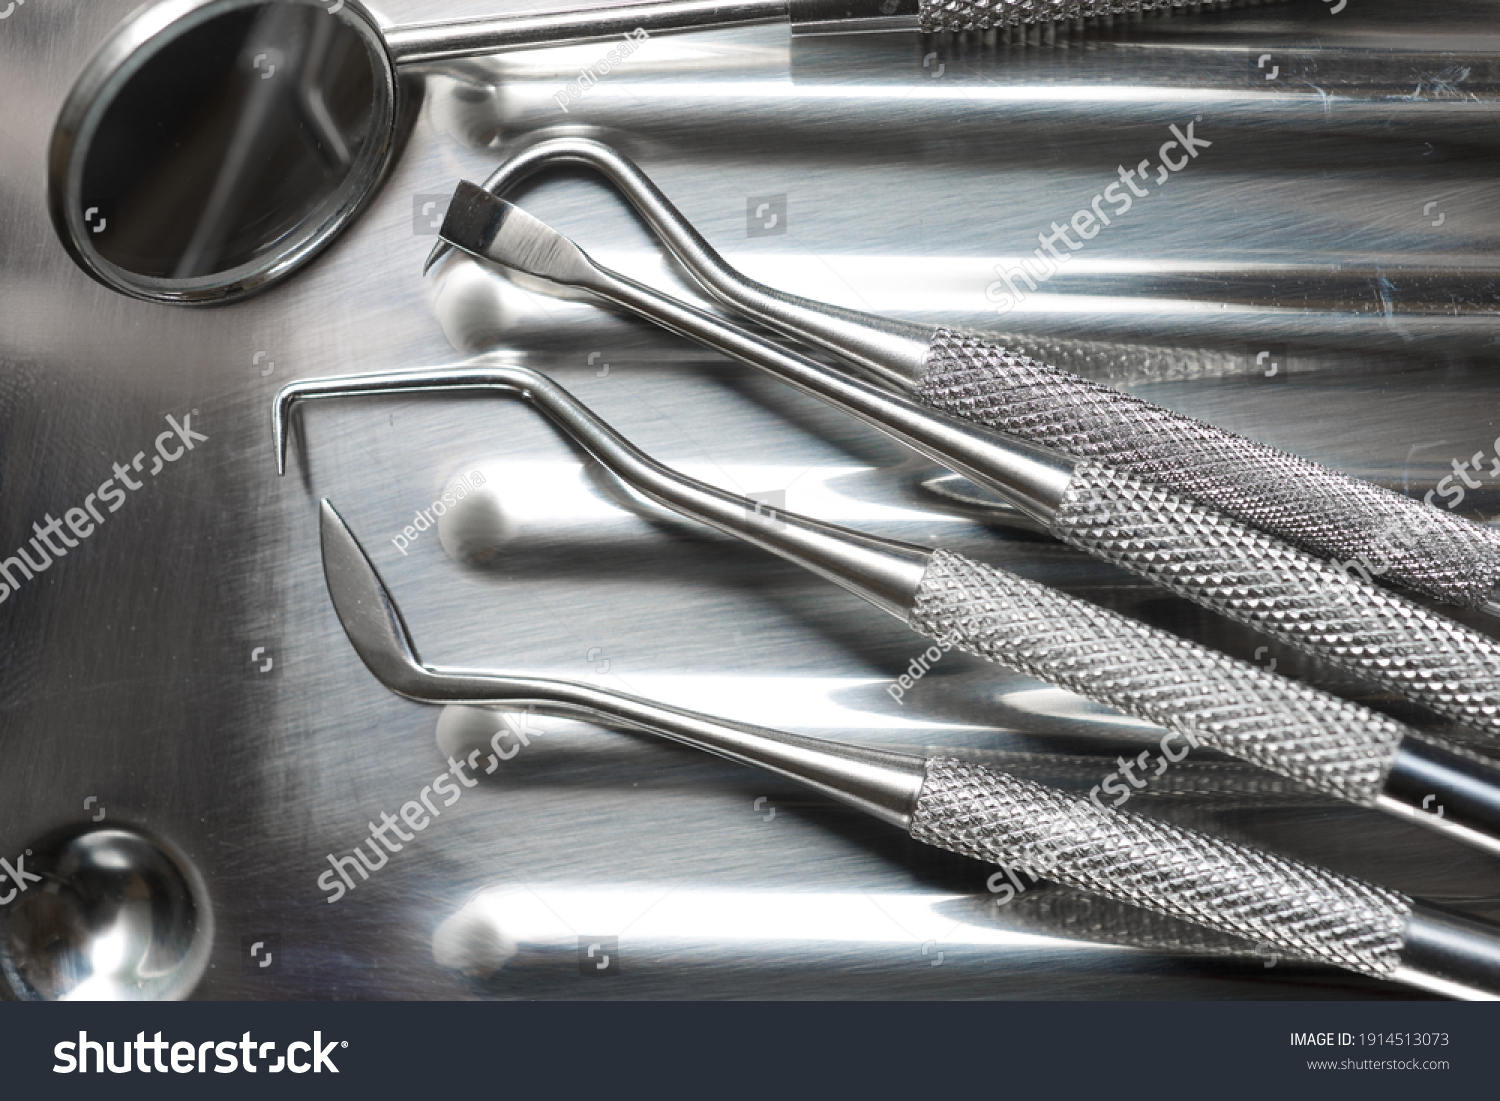 Instruments used by the dentist on a metal tray. #1914513073